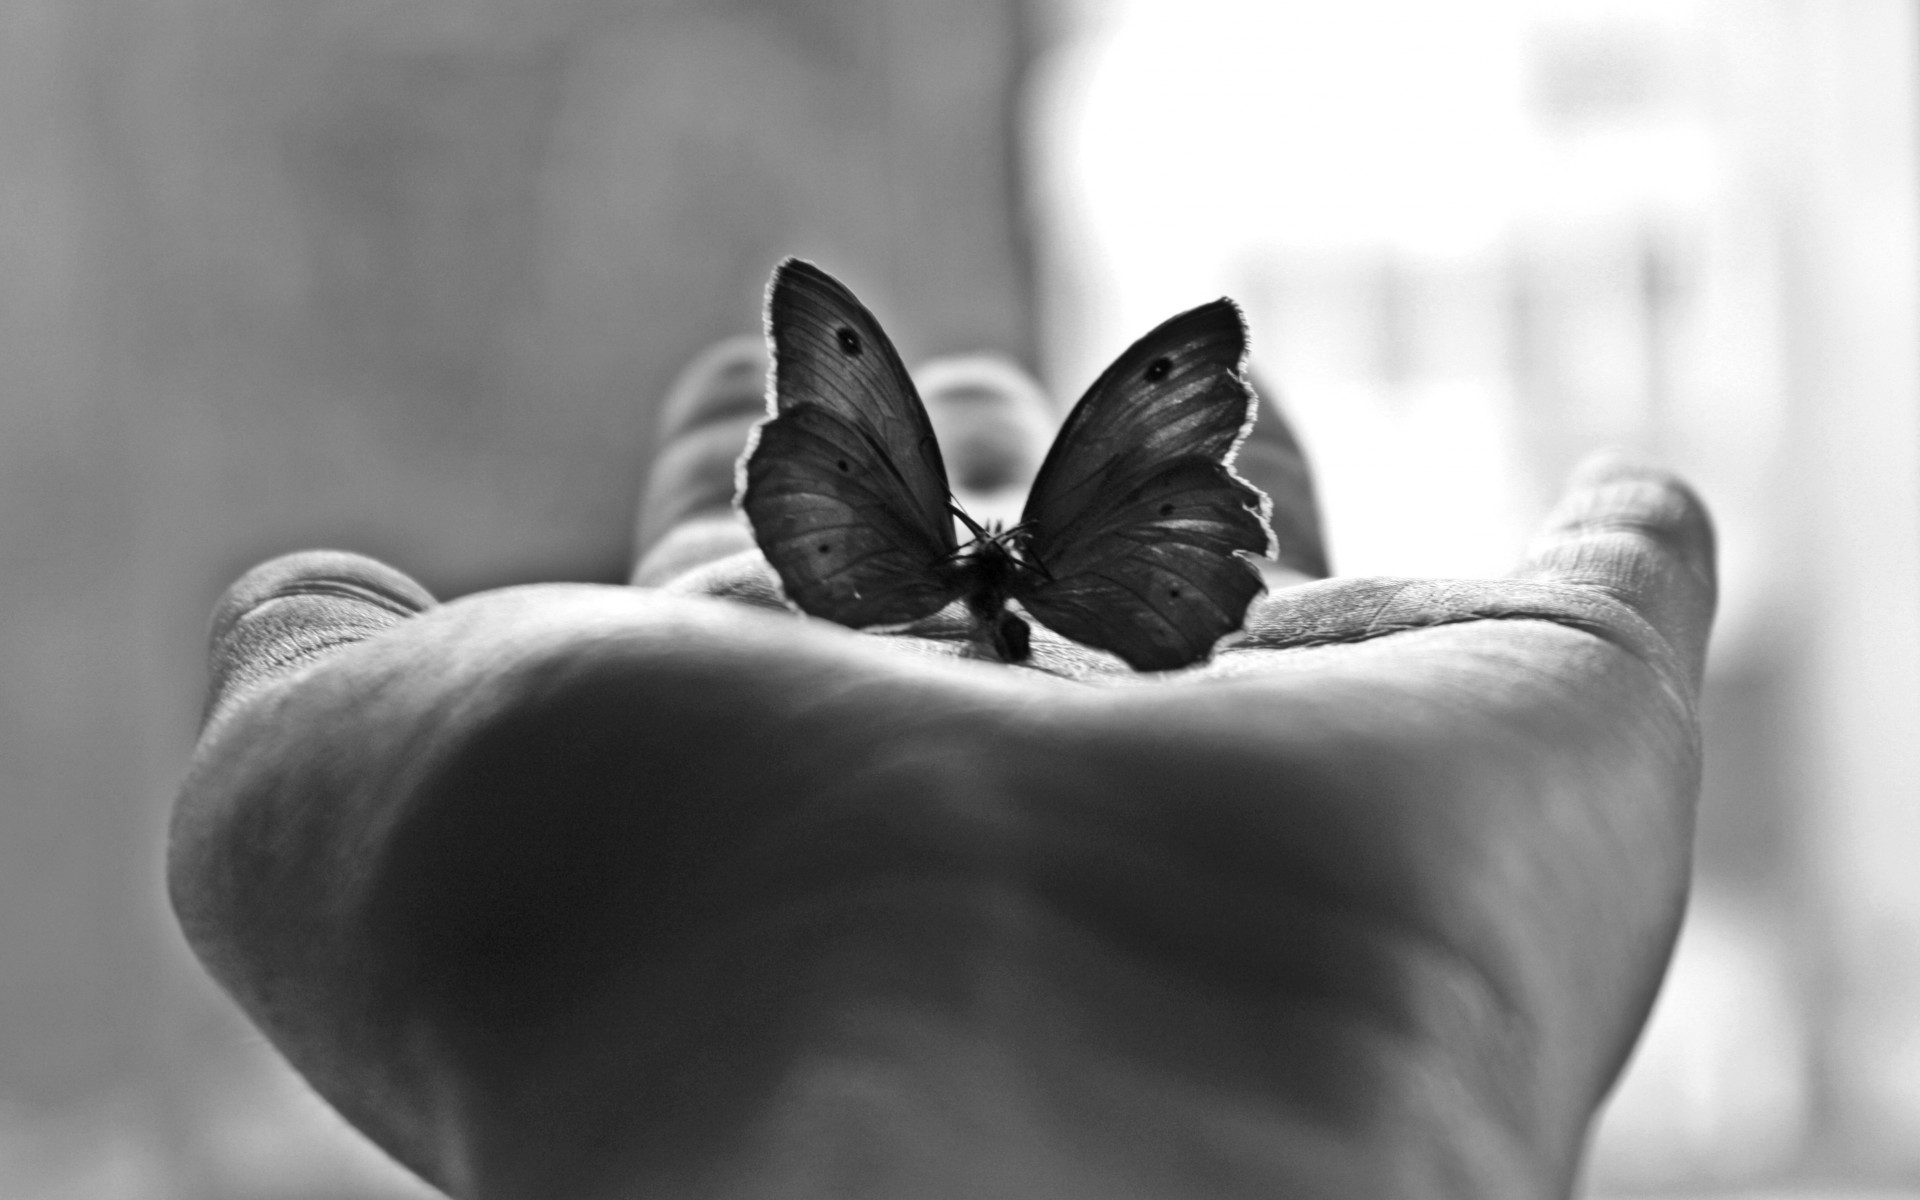 Butterfly On Hand Black And White - HD Wallpaper 